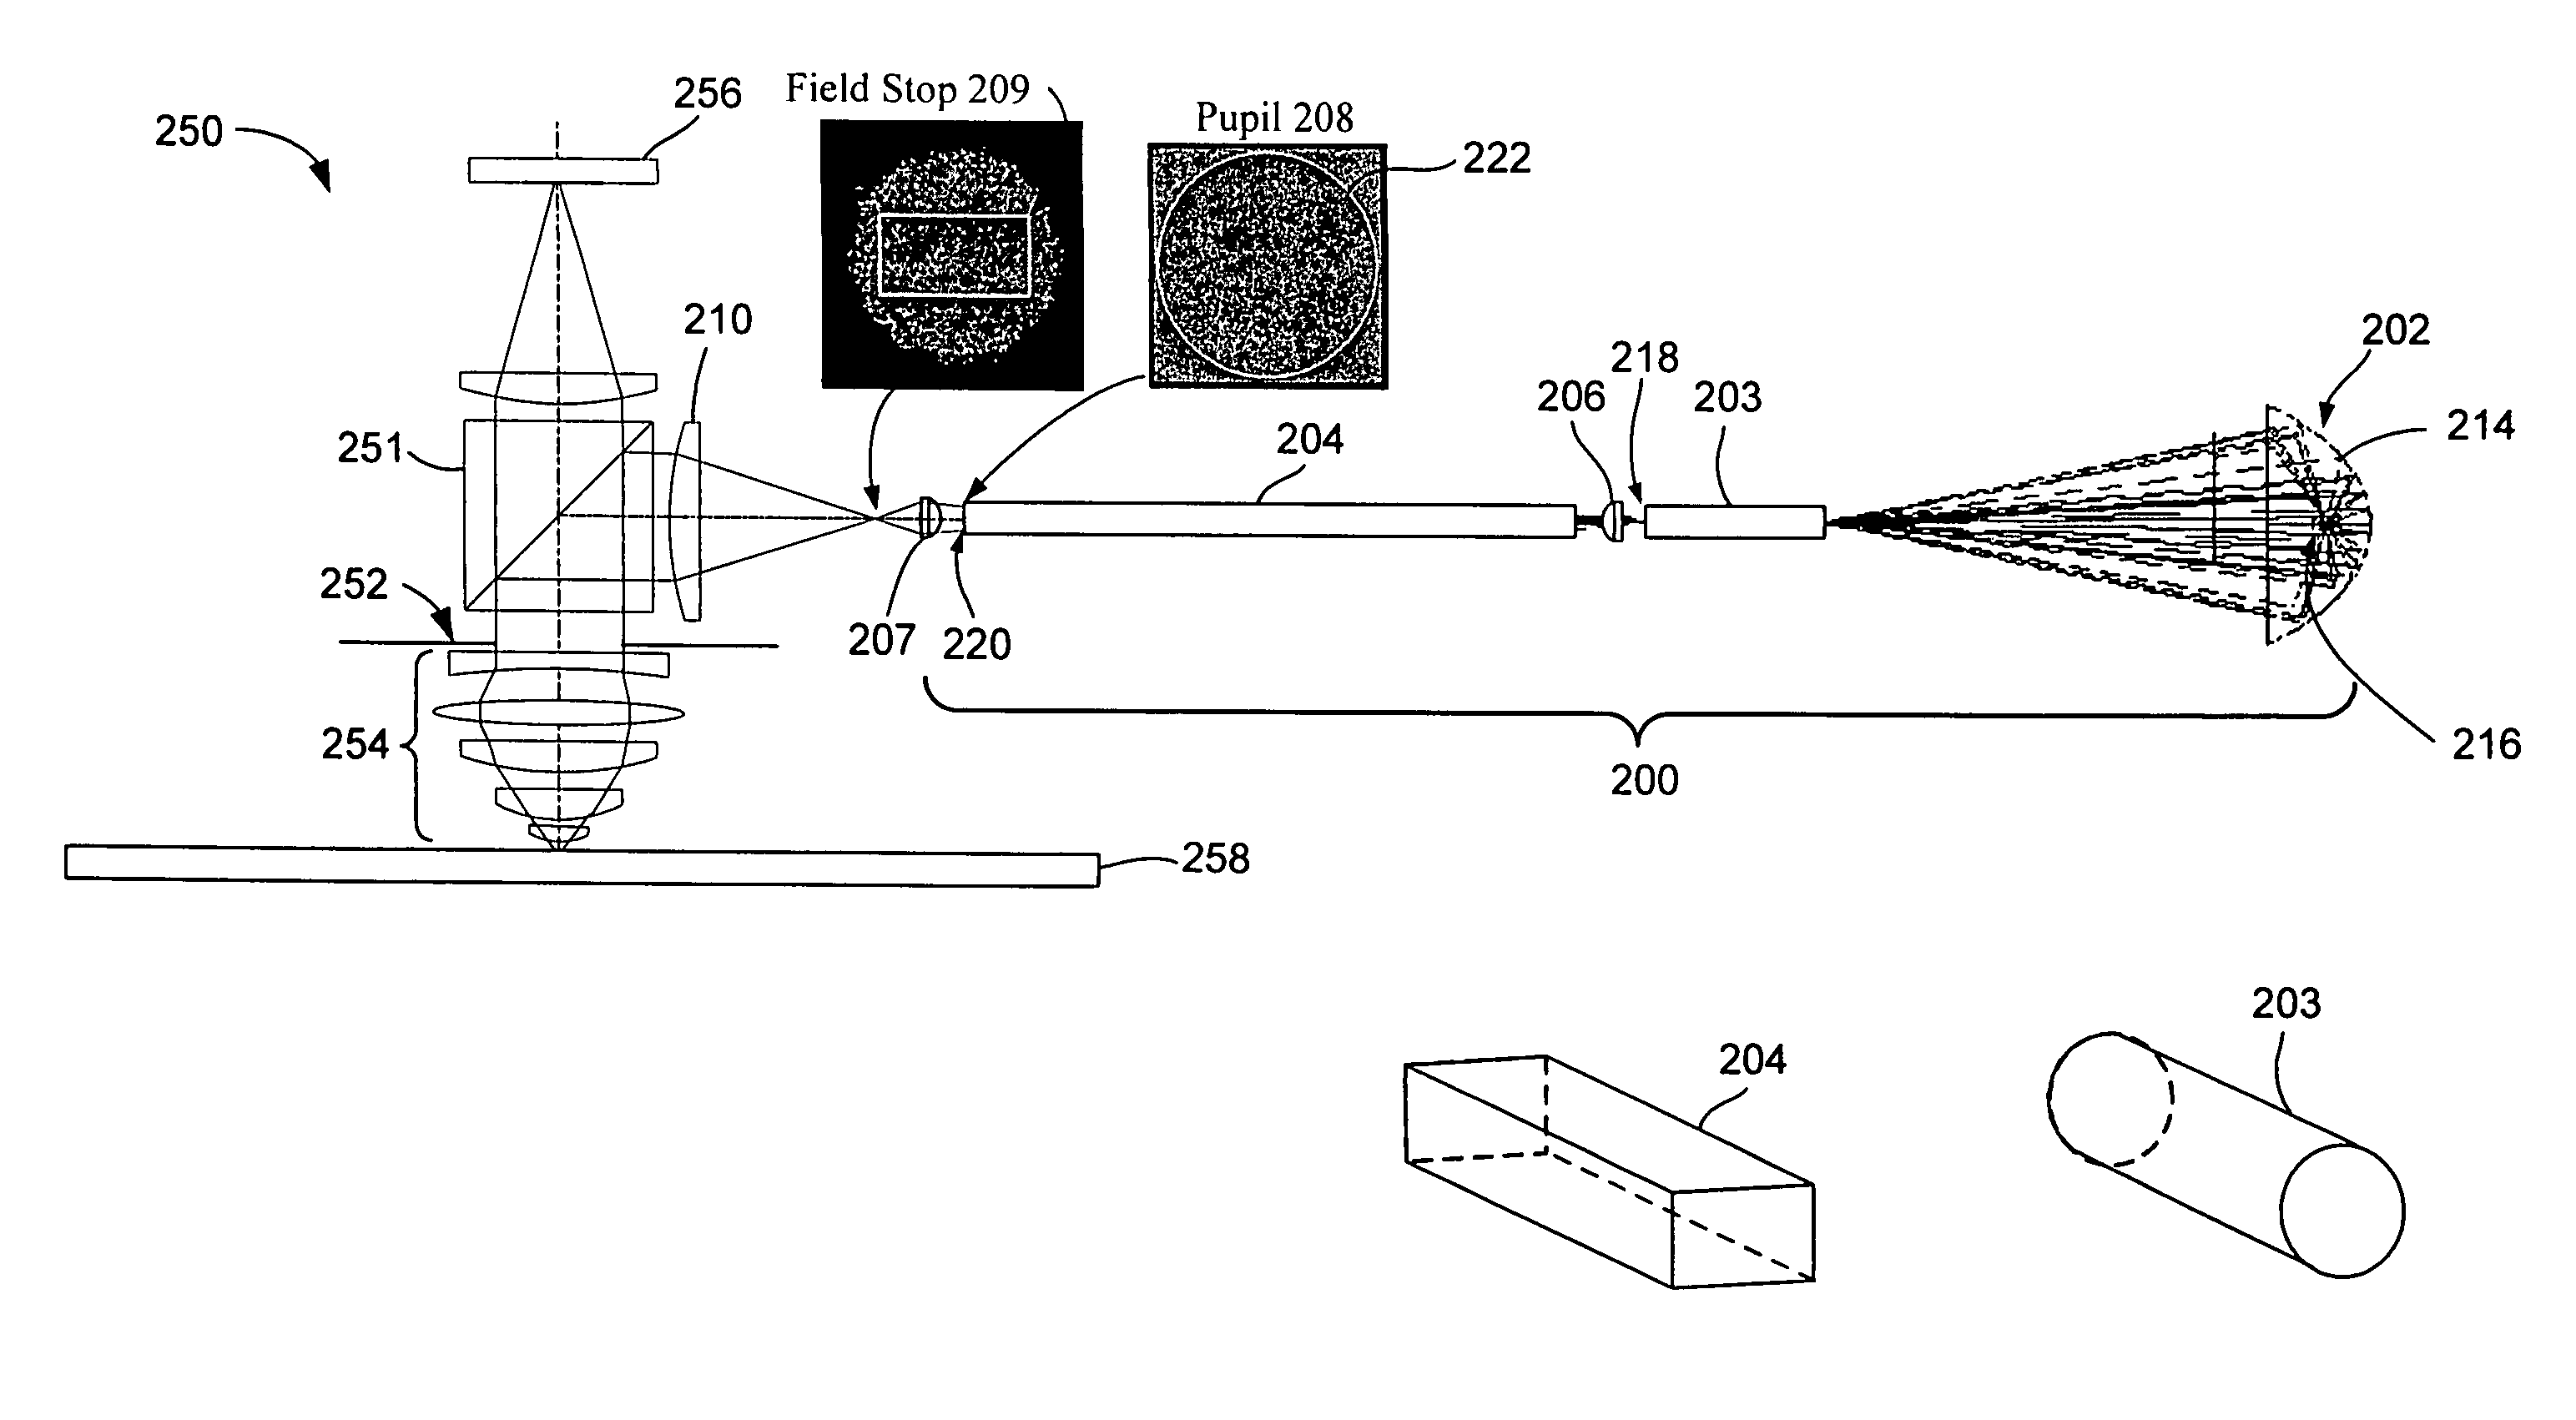 Uniform pupil illumination for optical inspection systems